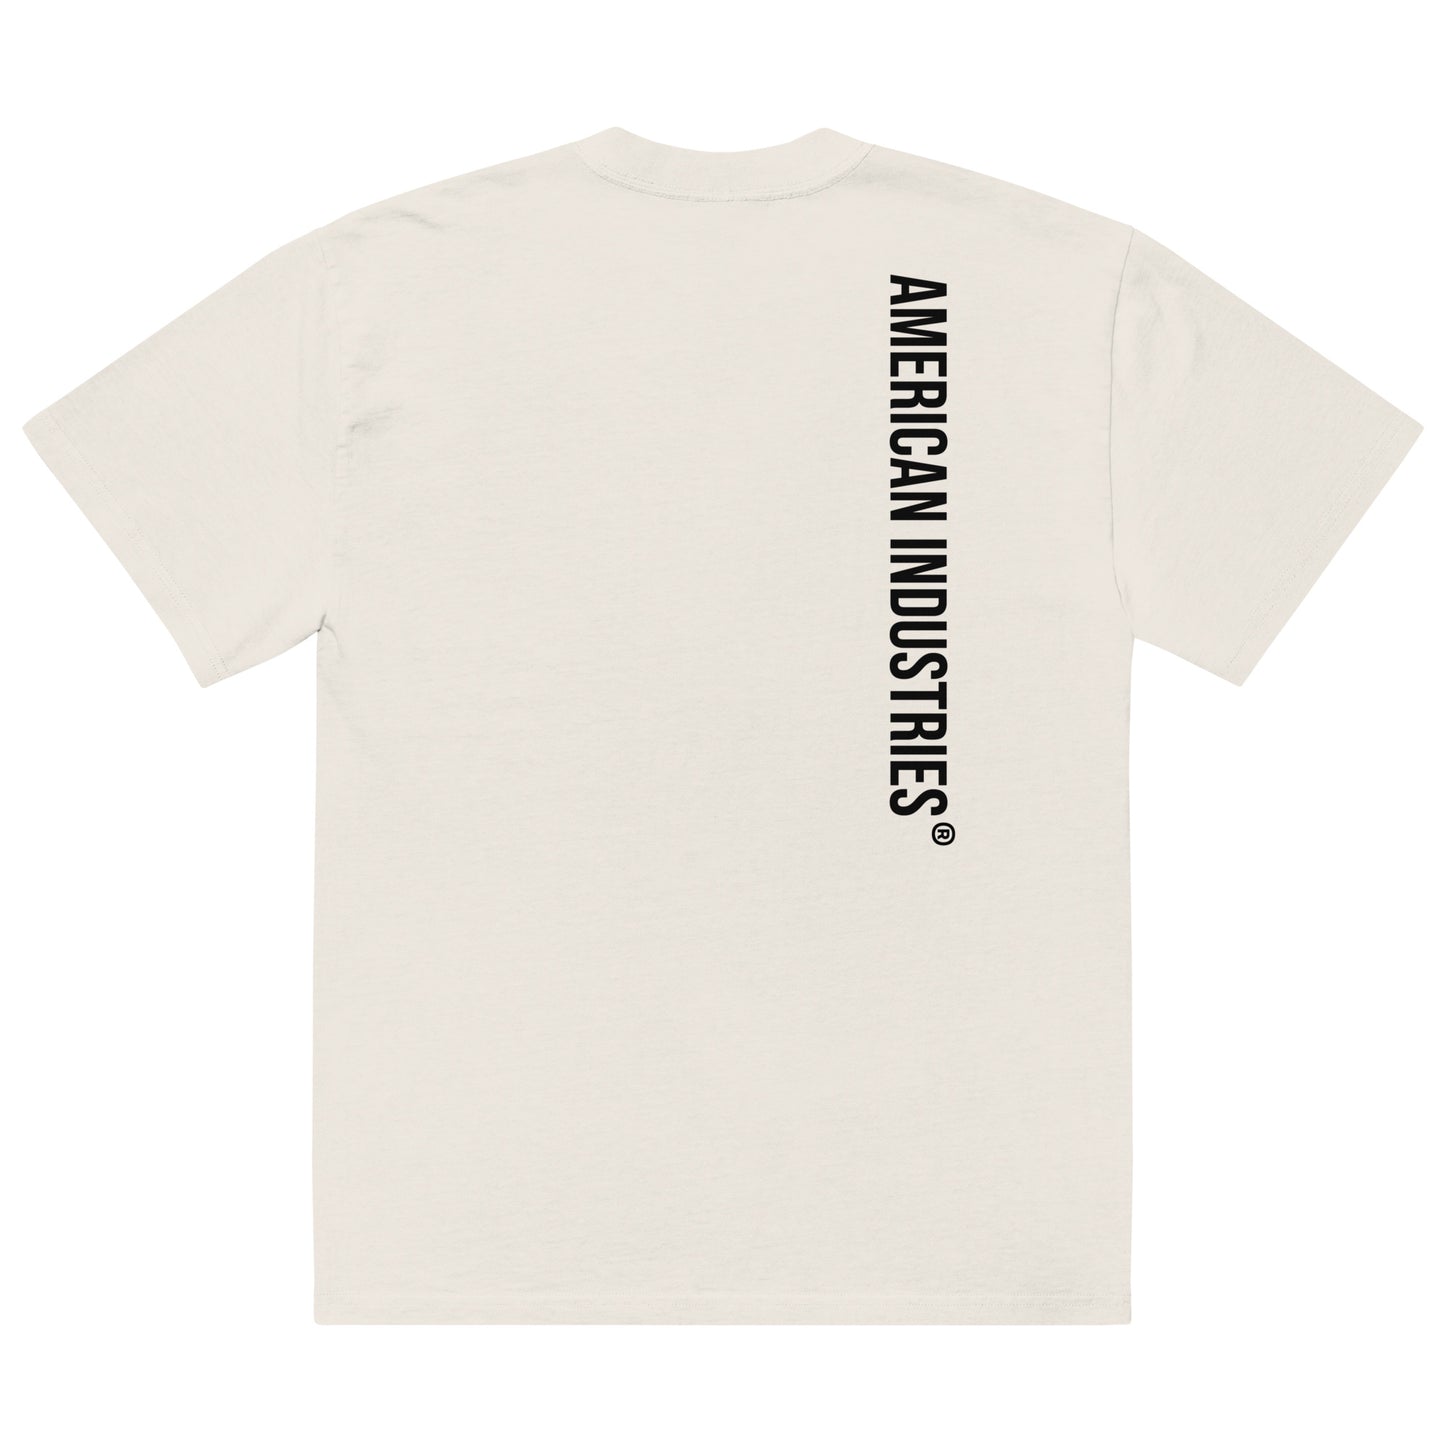 American Industries ® EOD Oversized faded t-shirt